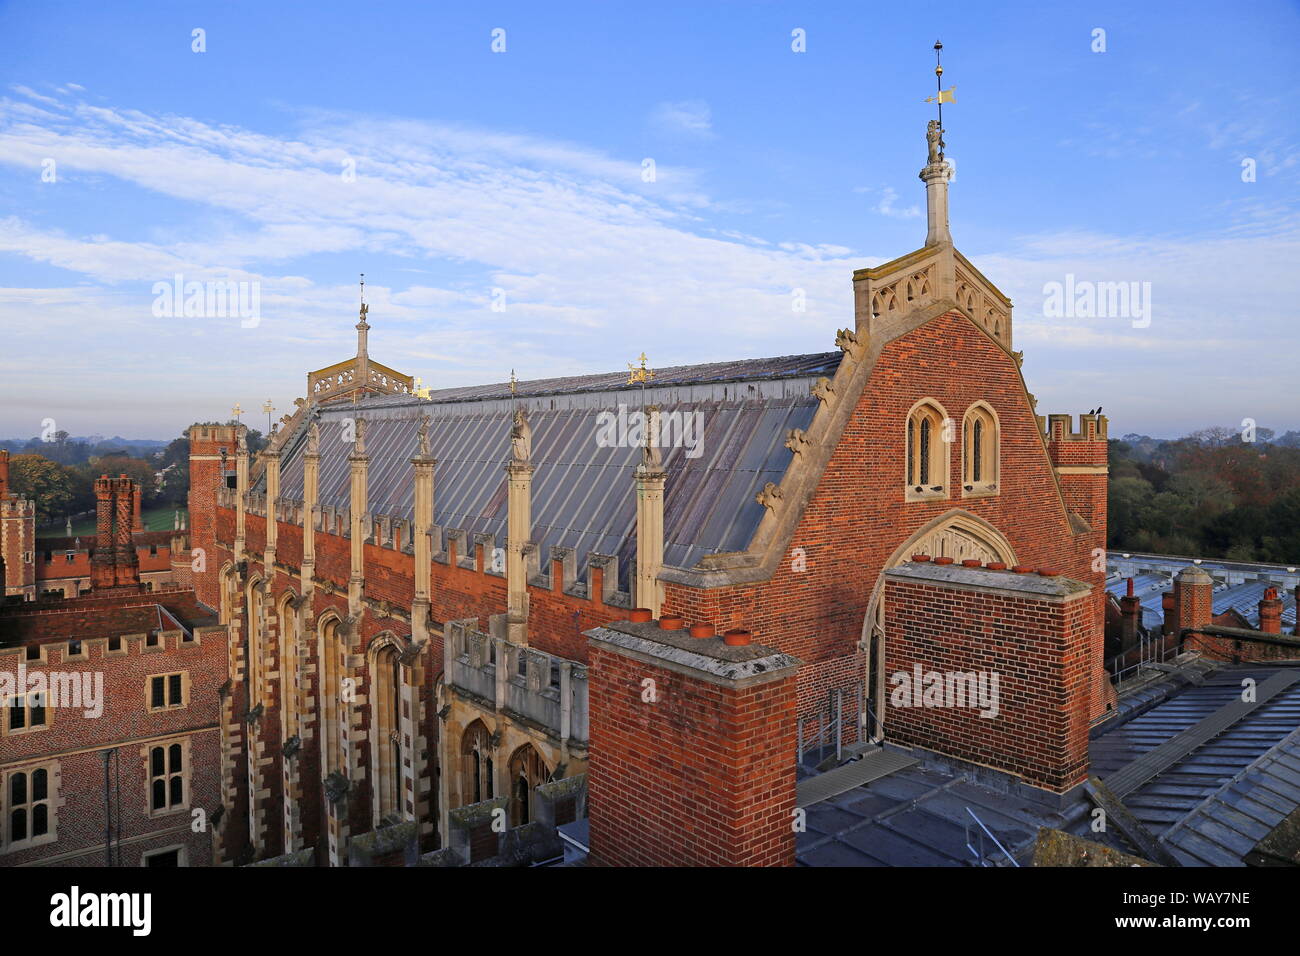 Great Hall, Rooftop Tour, Hampton Court Palace, East Molesey, Surrey, England, Great Britain, United Kingdom, UK, Europe Stock Photo